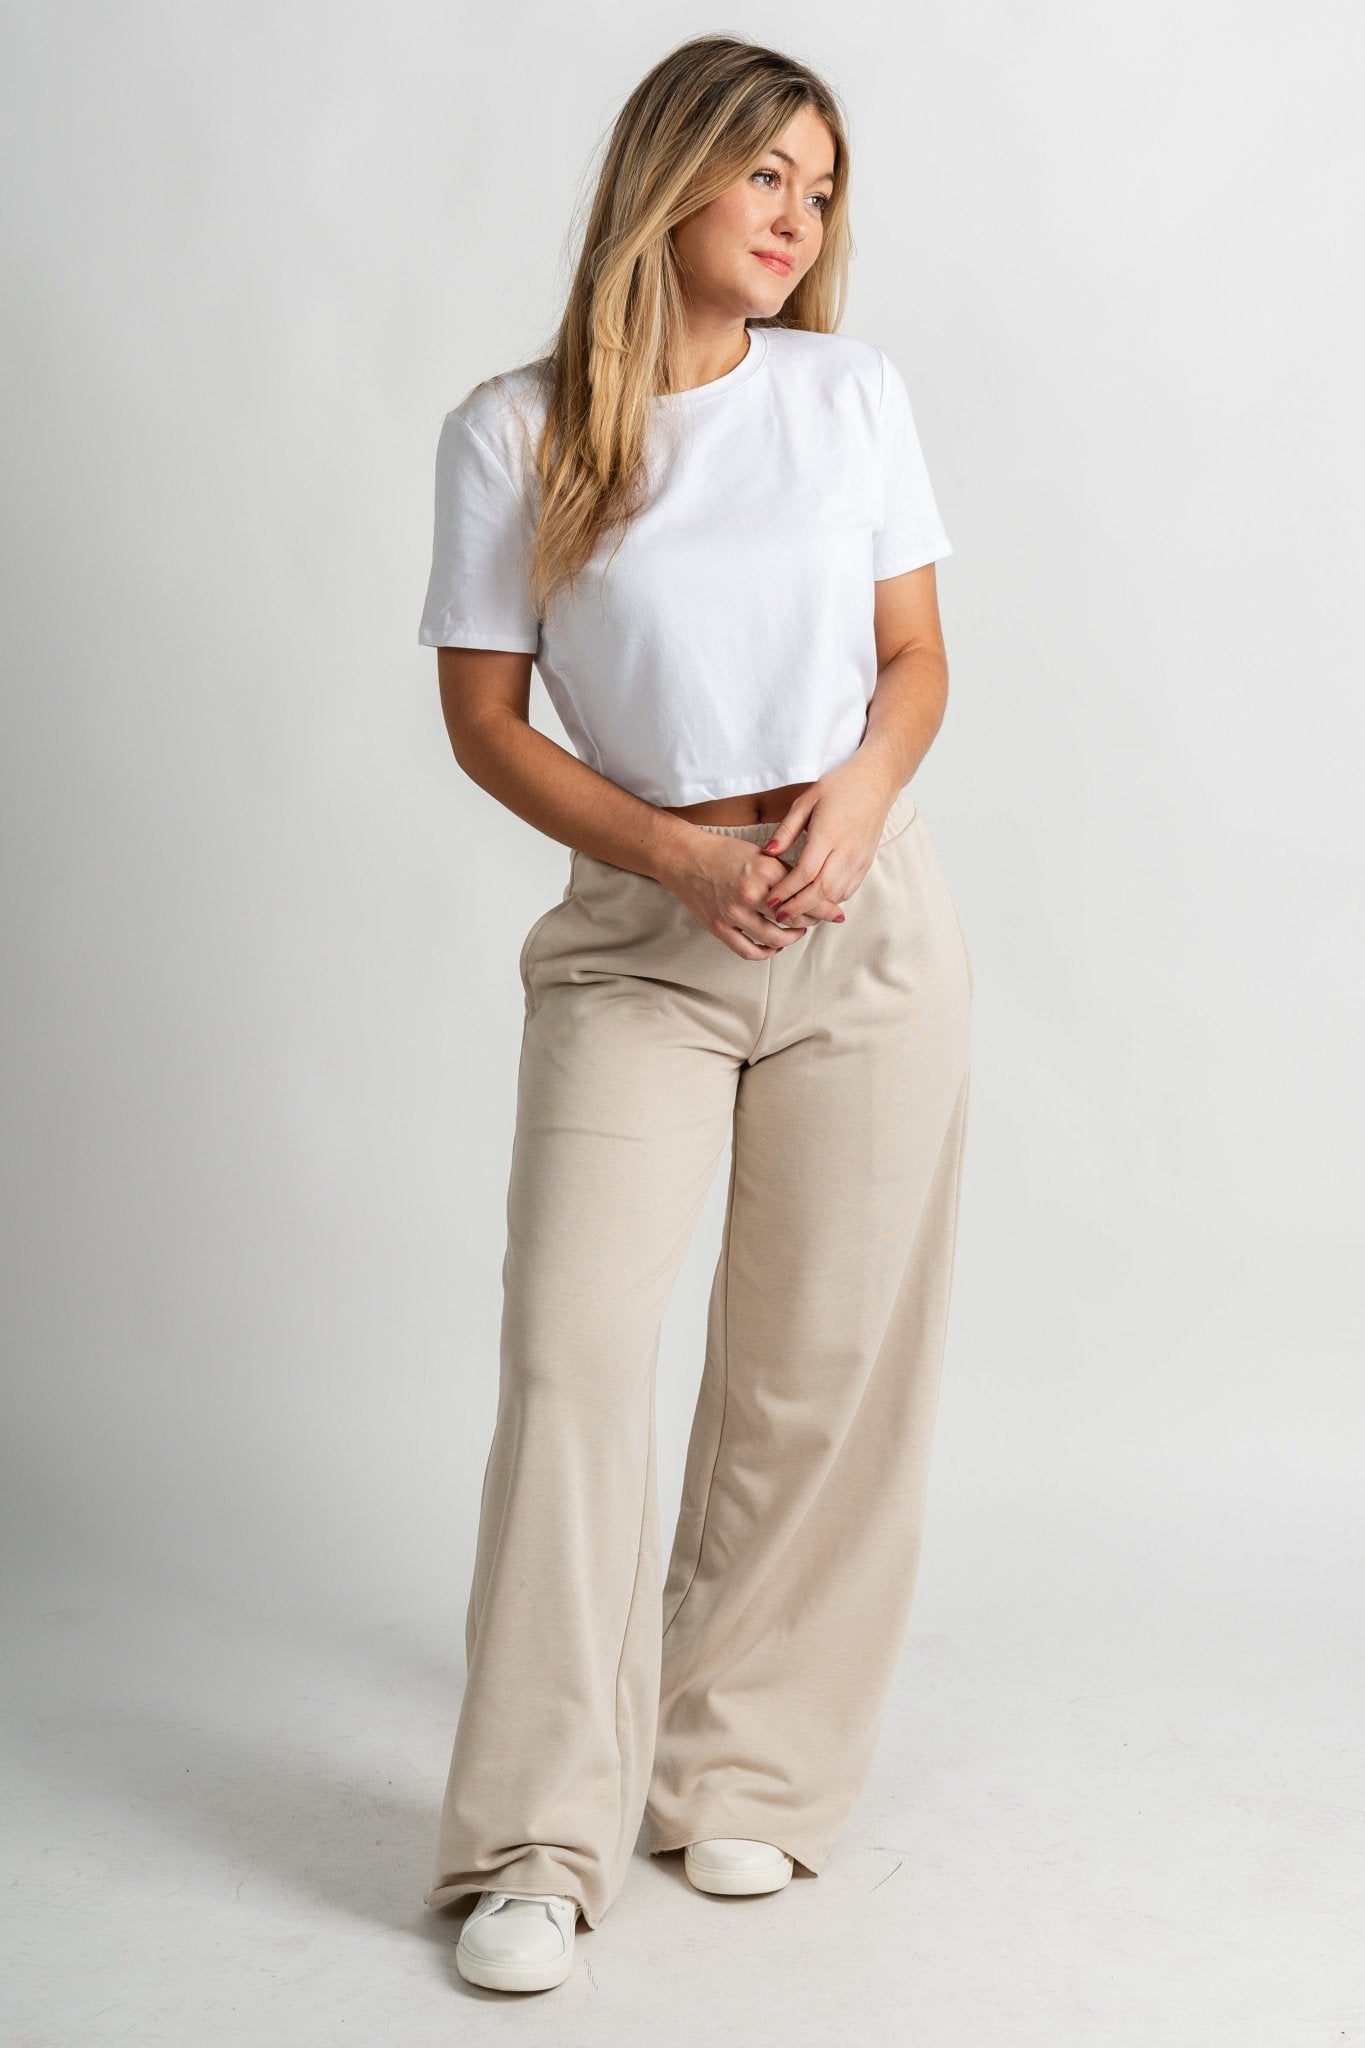 Vanessa wide leg lounge pant beige - Adorable Pants - Stylish Comfortable Outfits at Lush Fashion Lounge Boutique in OKC